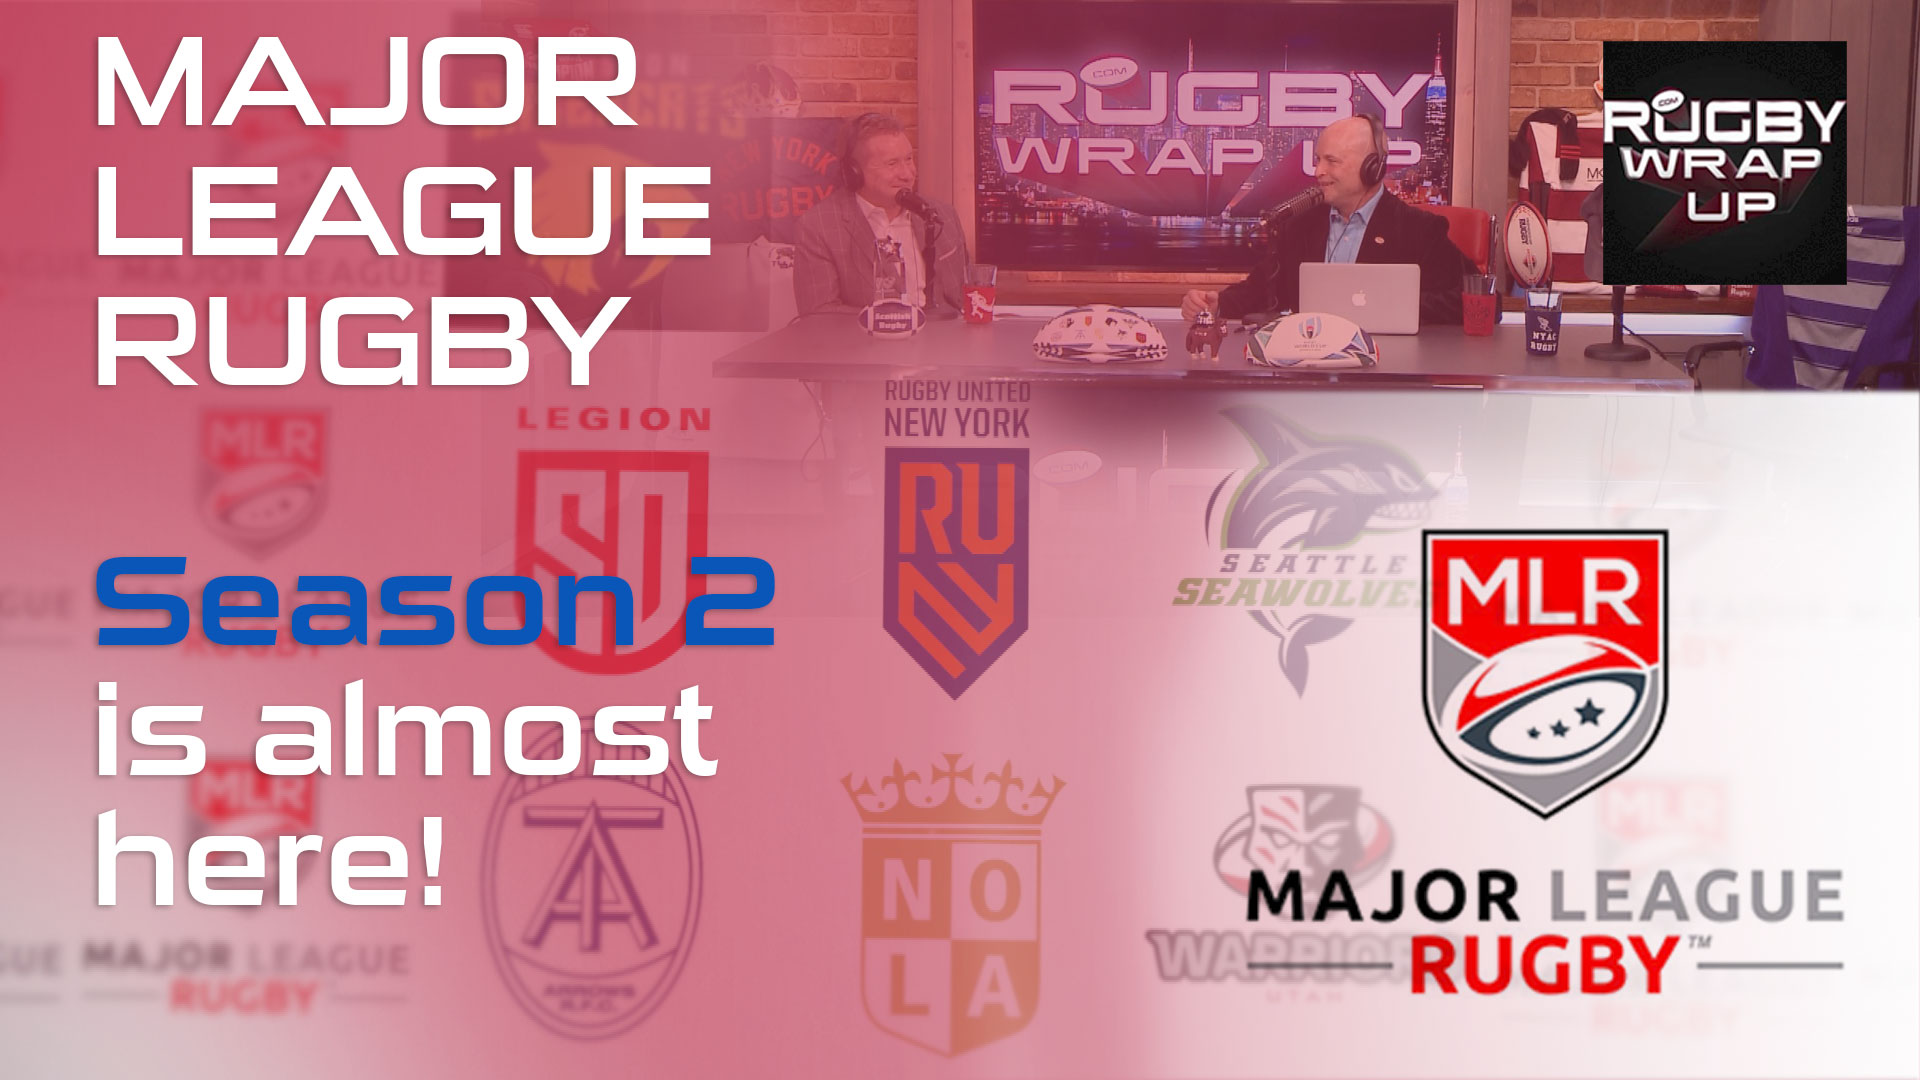 Rugby TV and Podcast: #USMLR Team Analysis, Cash Woes, Ben Foden, Bus Crash. #COTY Steve_Lewis, Matt_McCarthy, Rugby_Wrap_Up